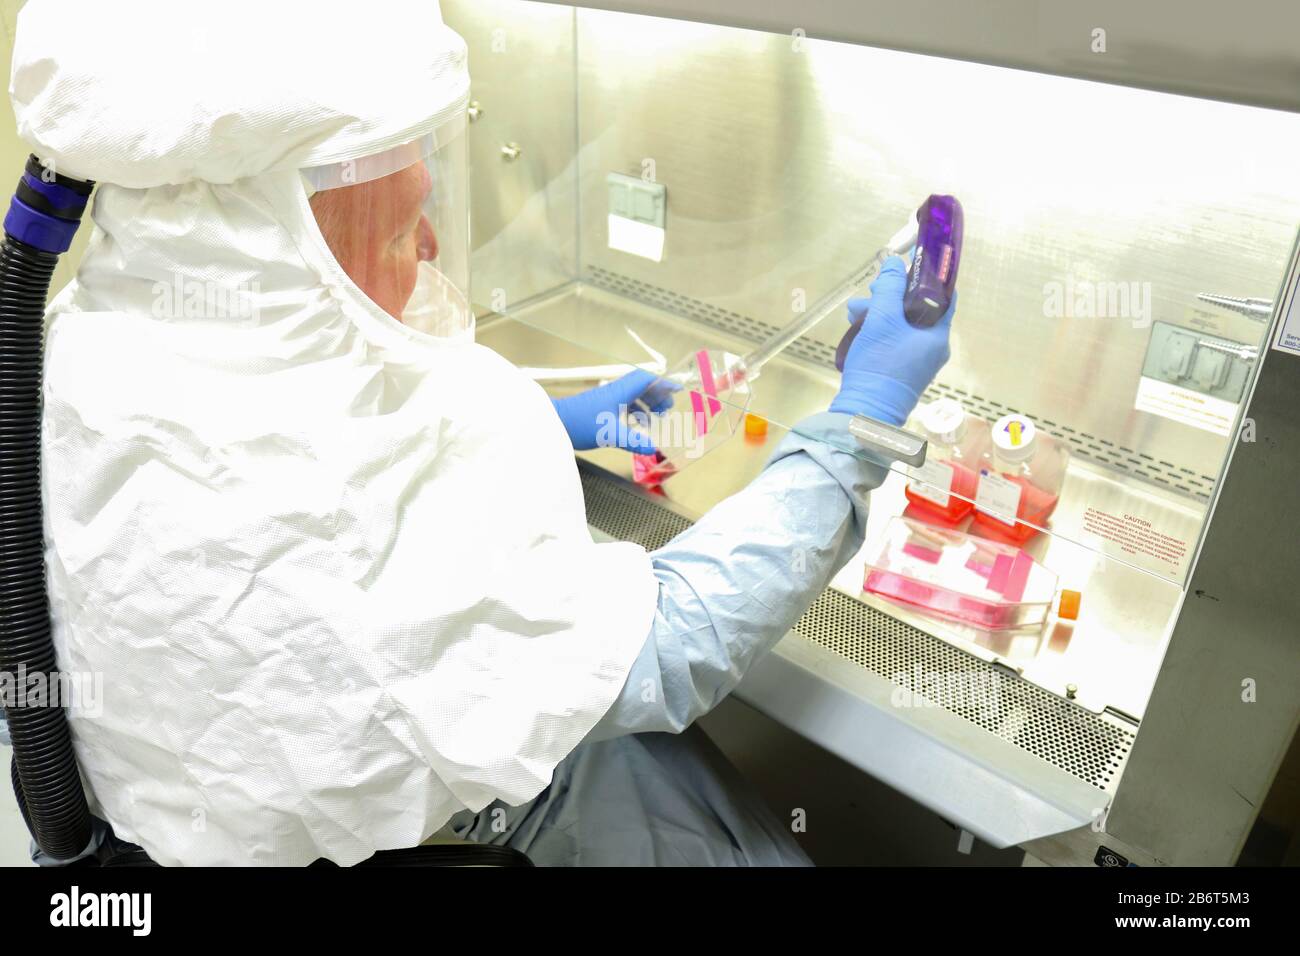 Harvesting samples of the virus that causes COVID-19 for use in developing models of infection, diagnostic tests, and vaccines and therapeutics. Stock Photo